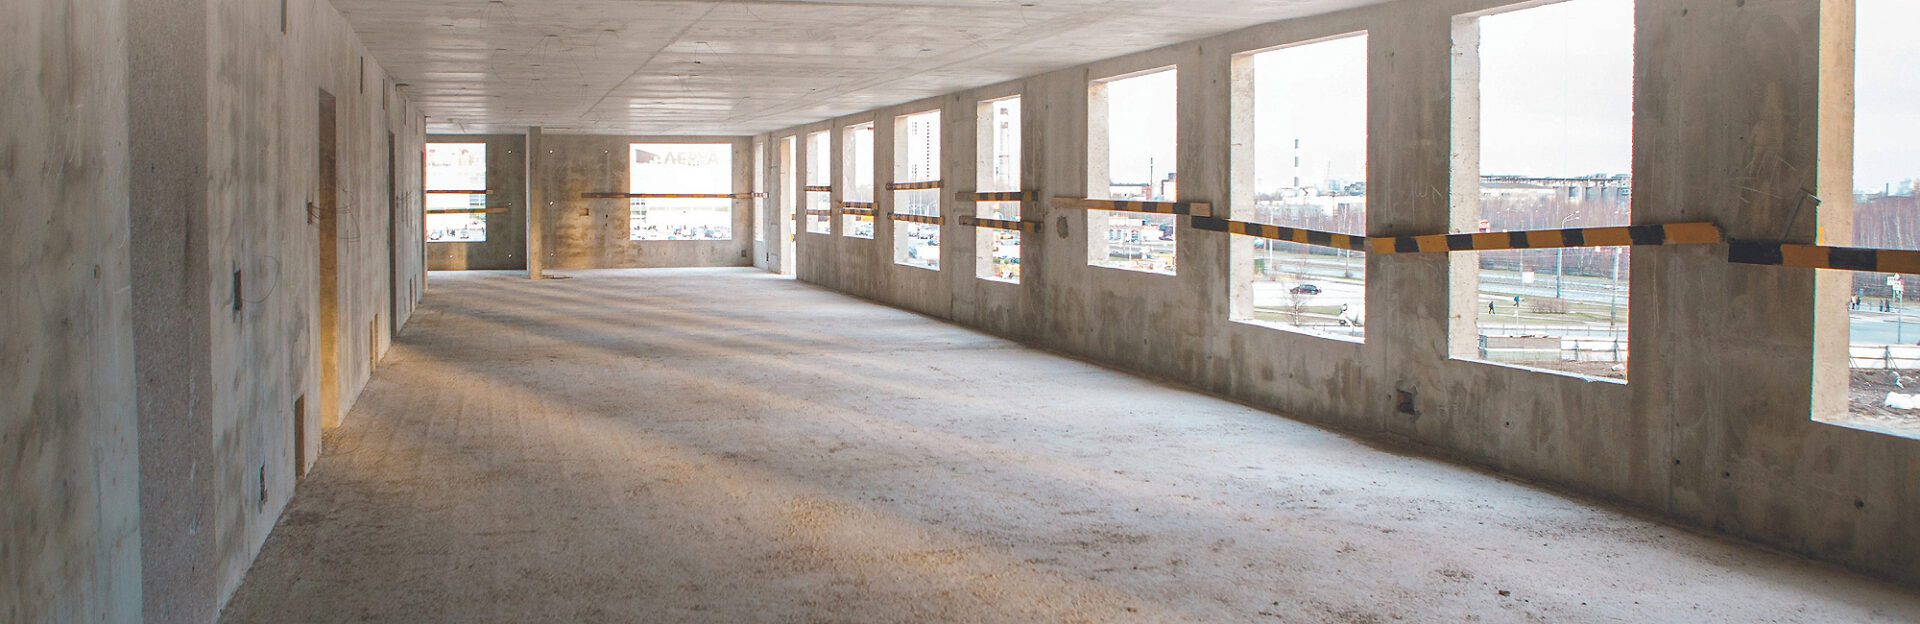 A large empty room with many windows and concrete floors.